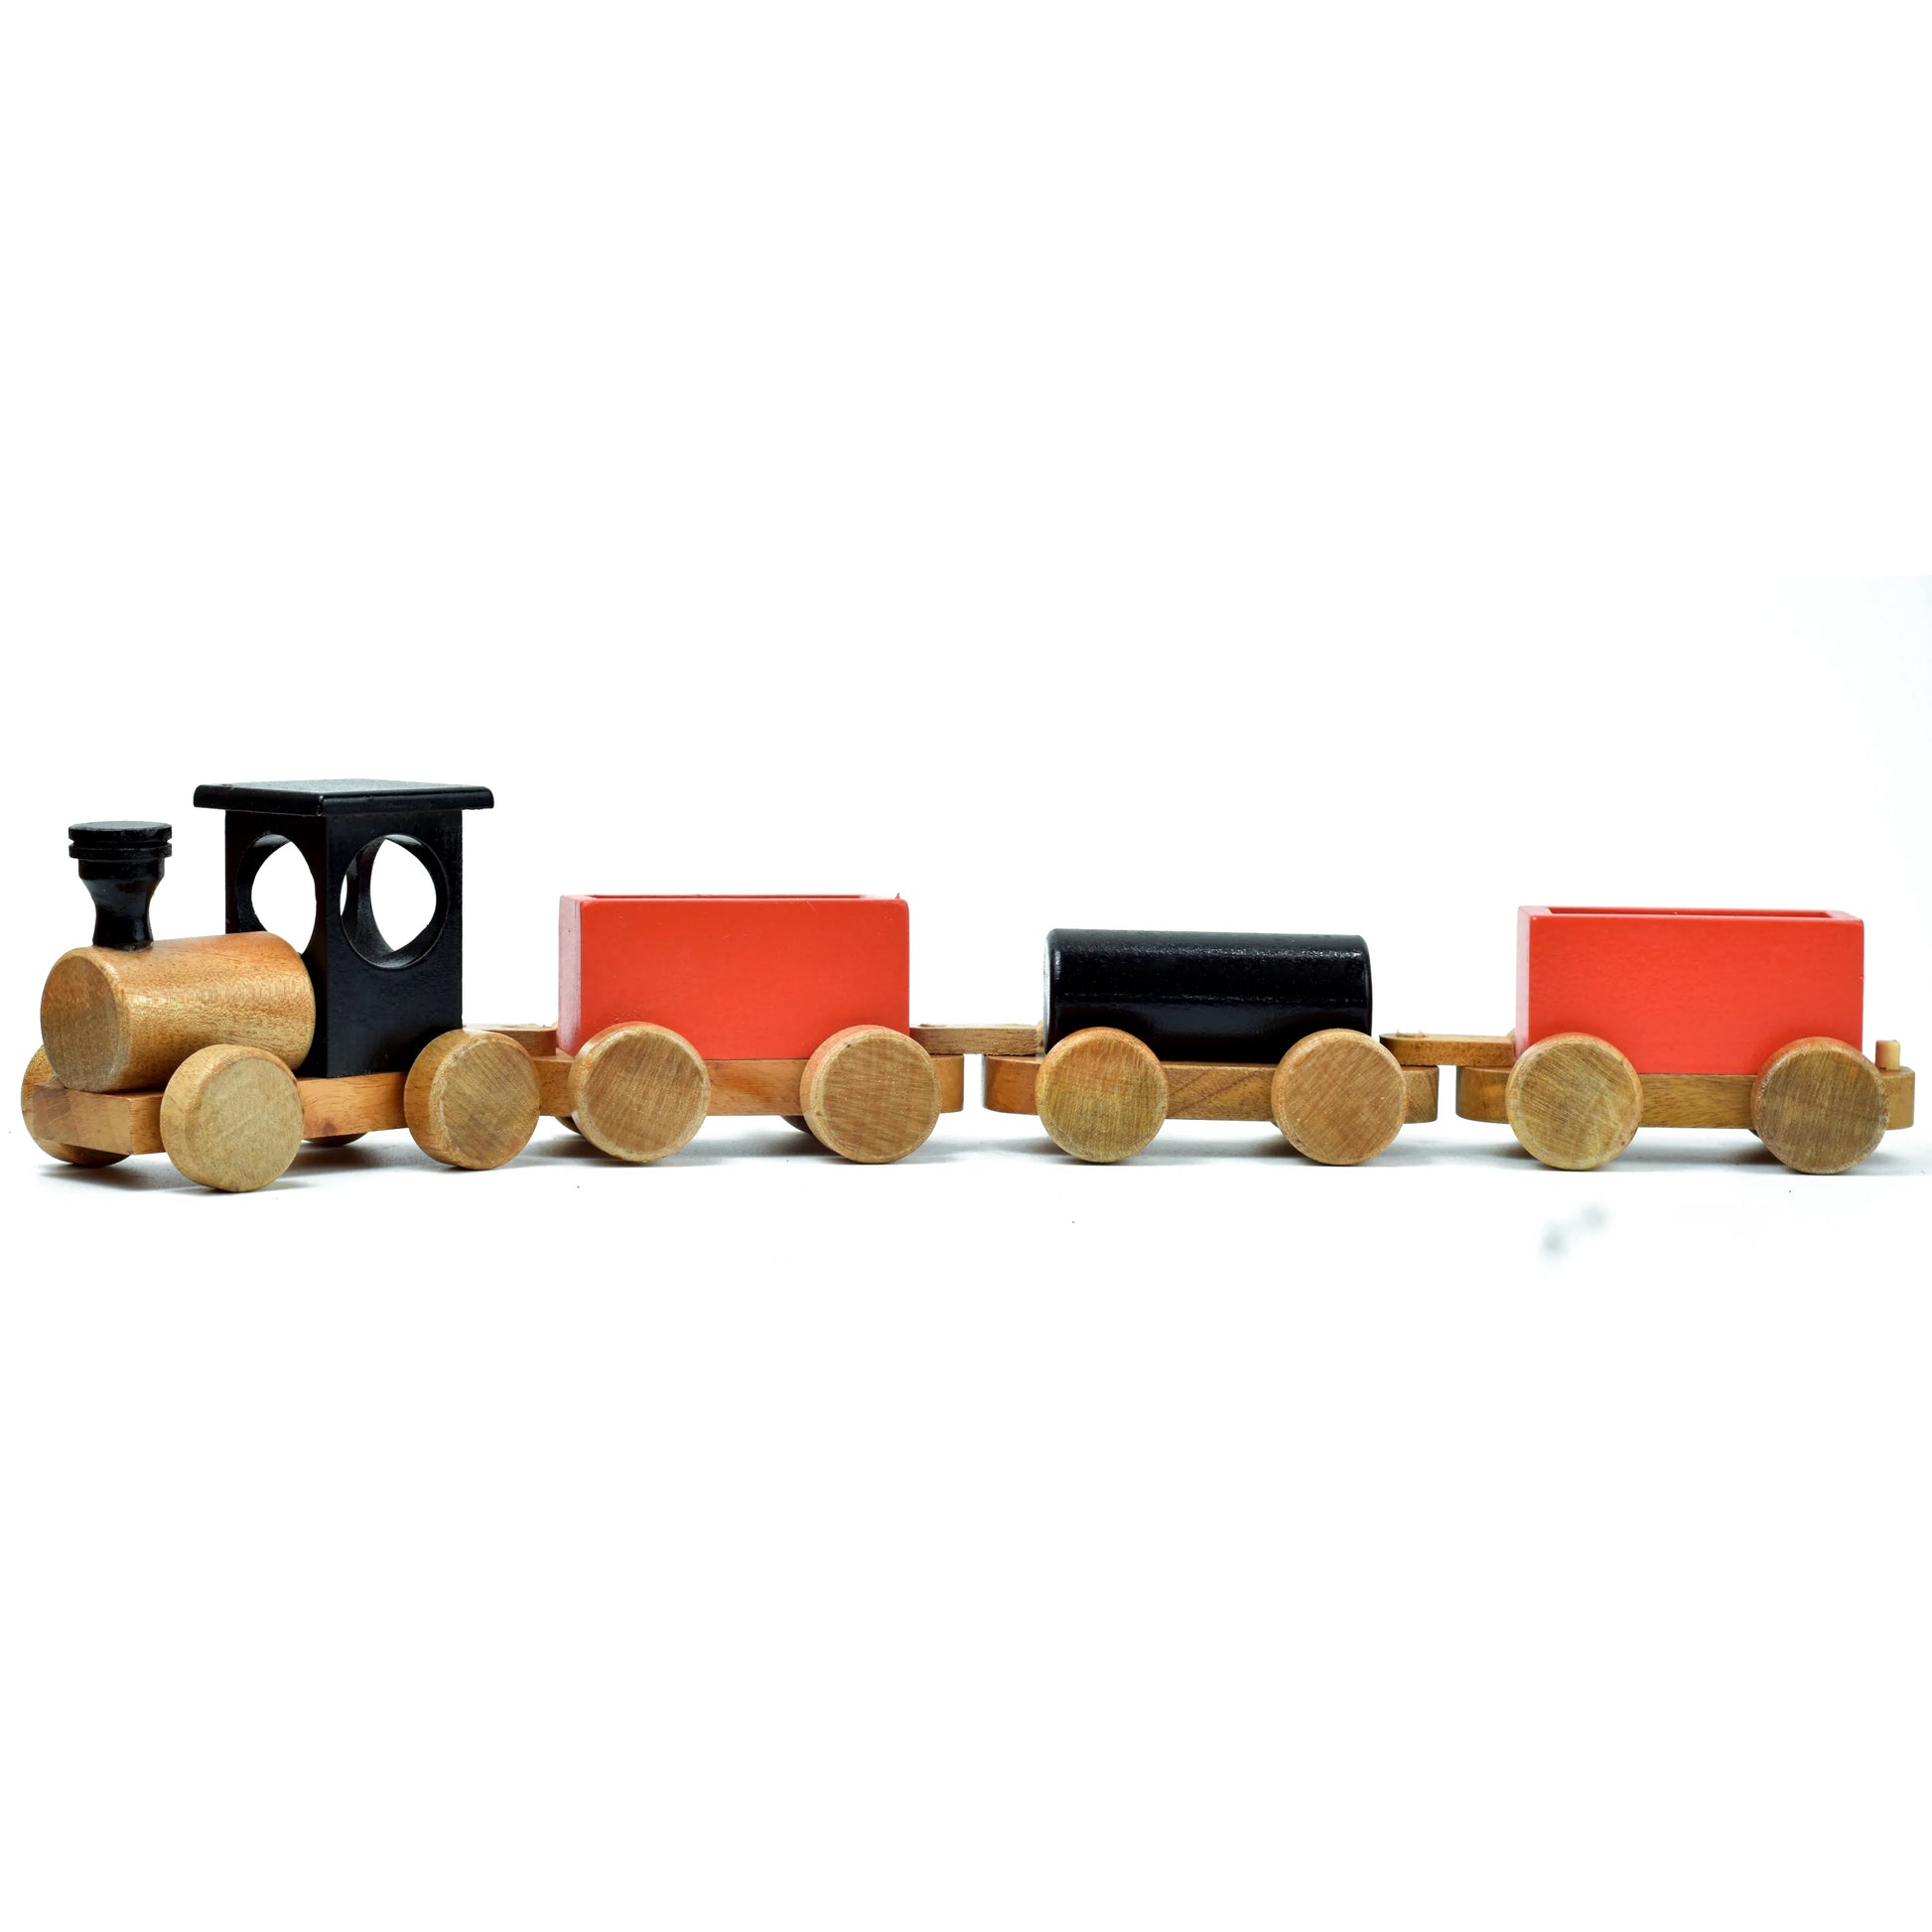 Buy Wooden Train Play Toy - SkilloToys.com